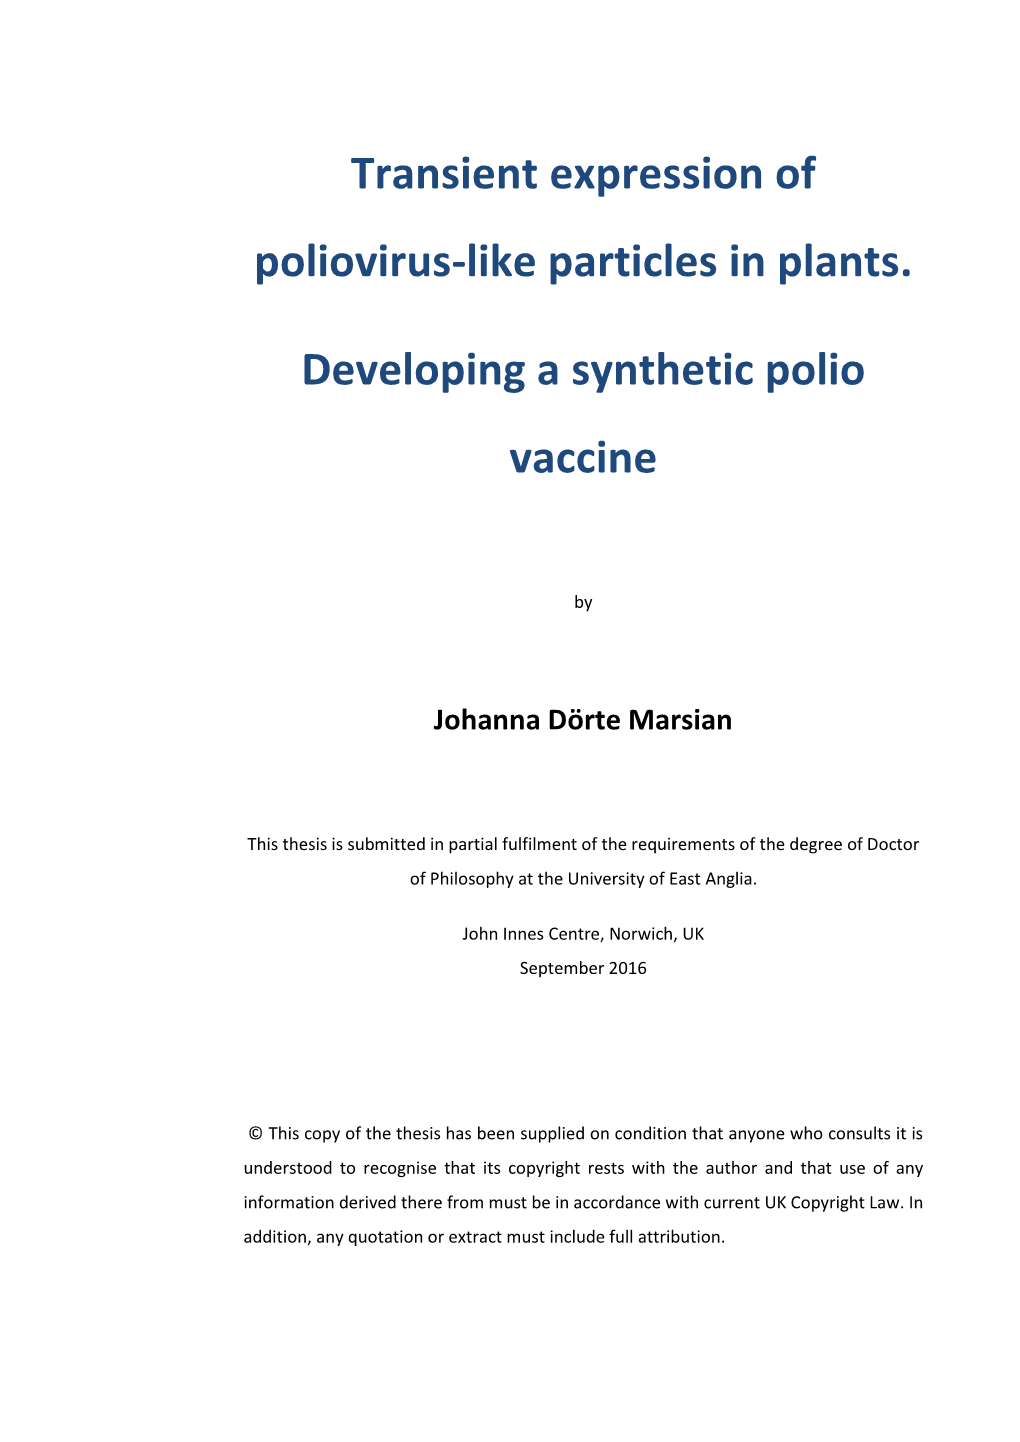 Transient Expression of Poliovirus-Like Particles in Plants